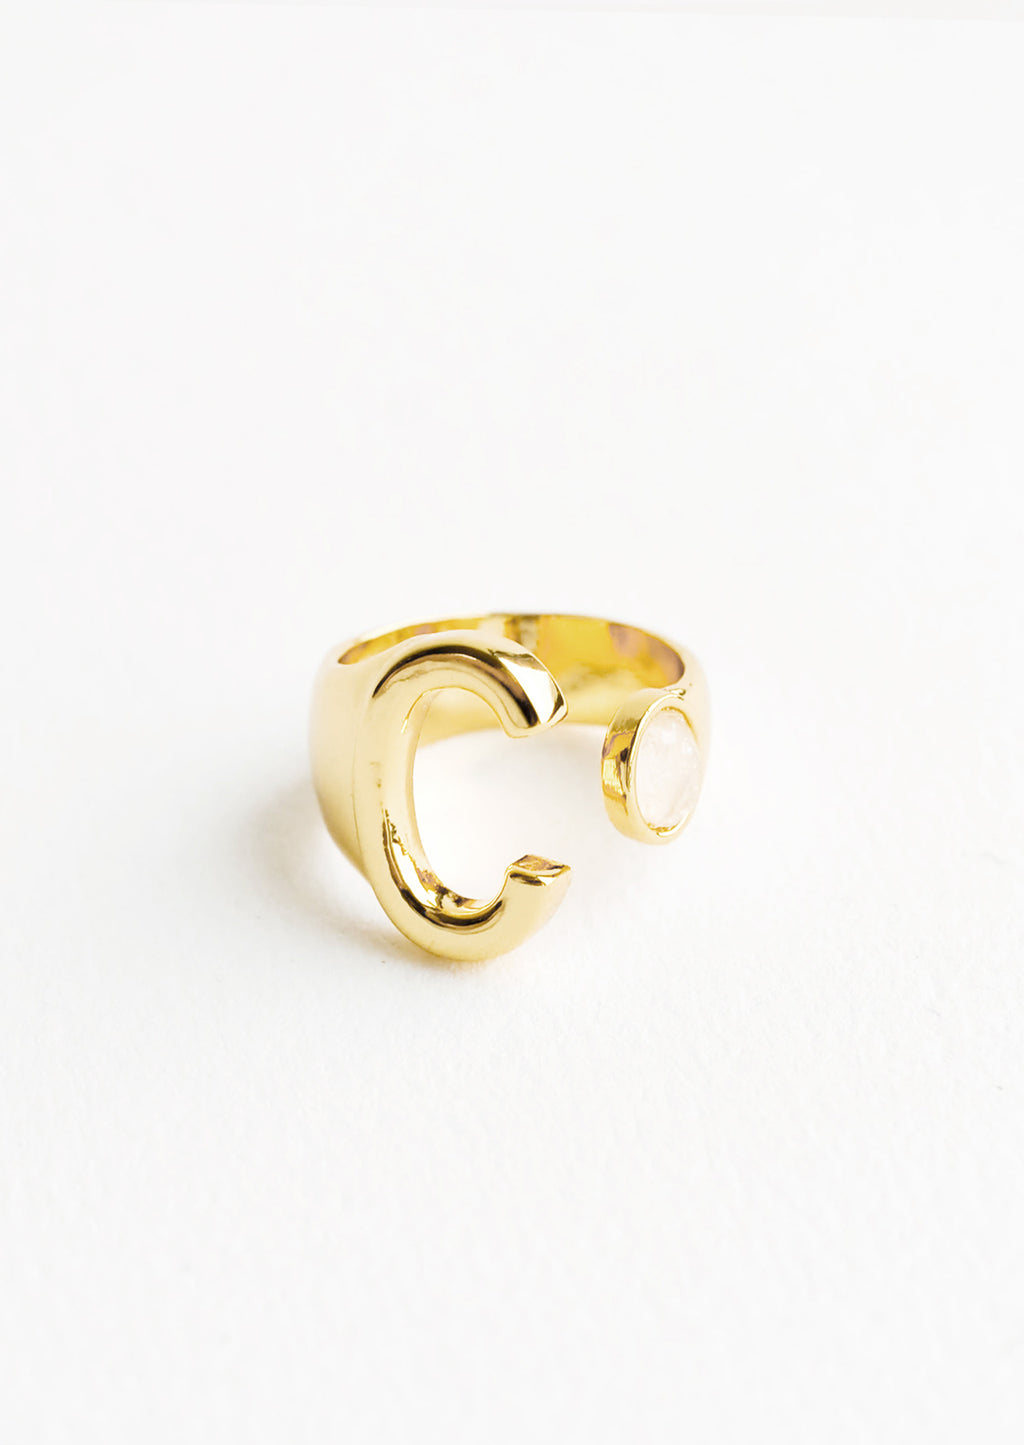 C: Yellow gold ring with letter C and oval glass crystal, and wide adjustable band.